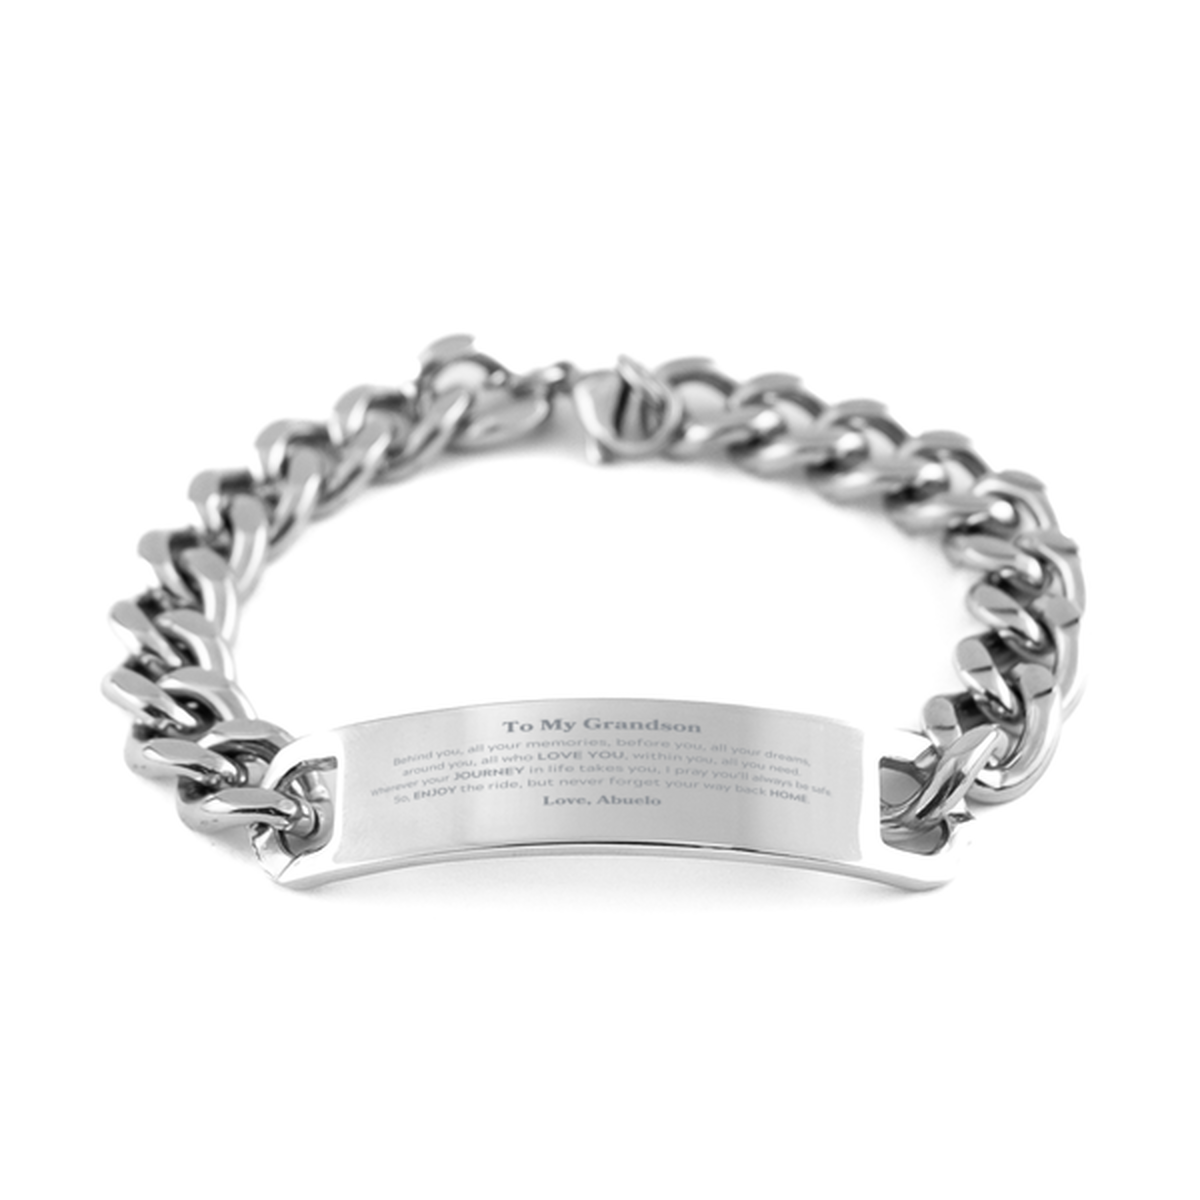 To My Grandson Graduation Gifts from Abuelo, Grandson Cuban Chain Stainless Steel Bracelet Christmas Birthday Gifts for Grandson Behind you, all your memories, before you, all your dreams. Love, Abuelo